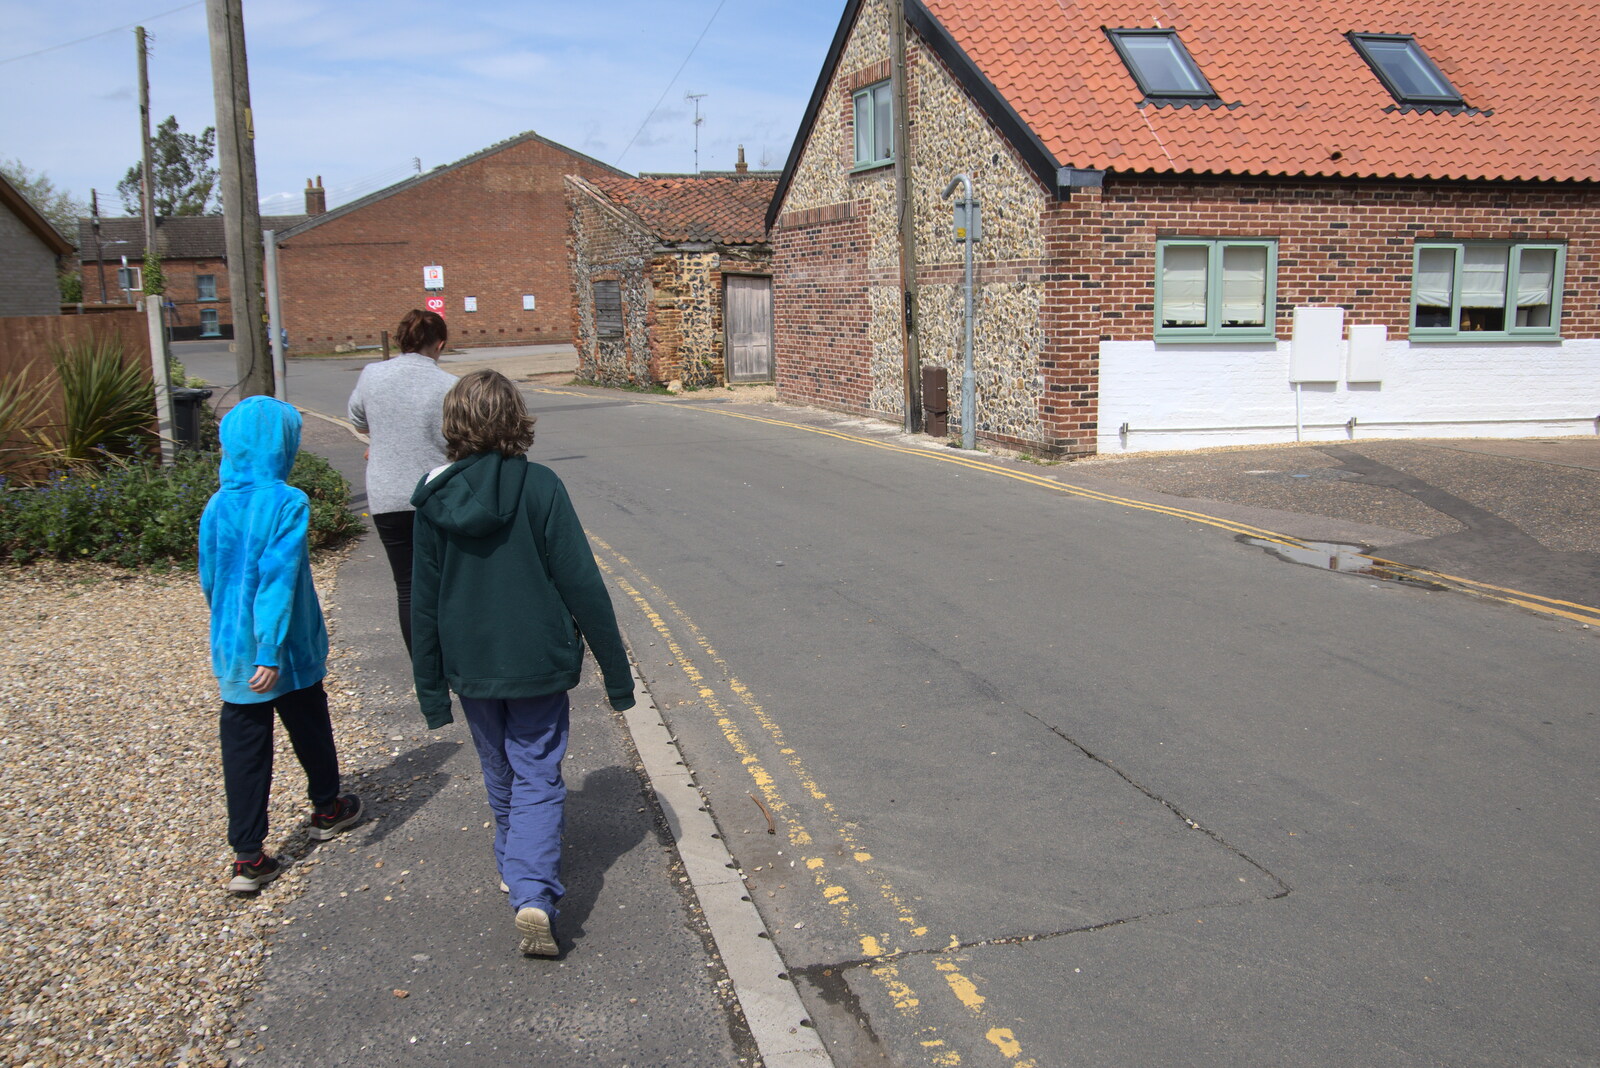 We head off into town from A Vaccination Afternoon, Swaffham, Norfolk - 9th May 2021